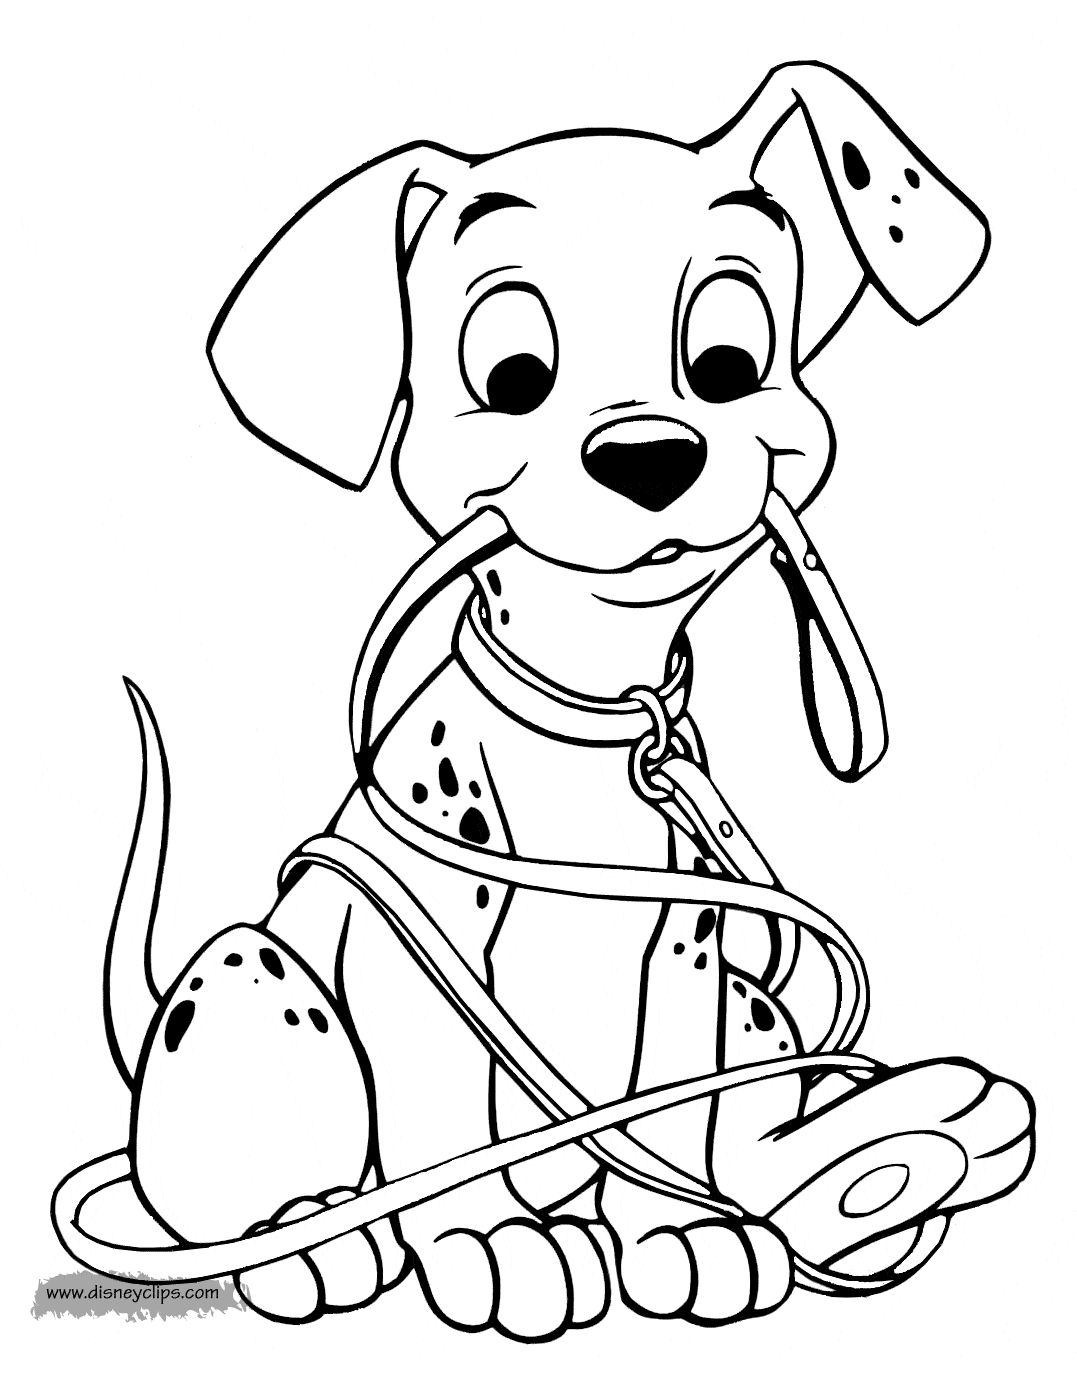 dogs coloring page 101 dalmatians coloring pages 2 disneyclipscom page dogs coloring 